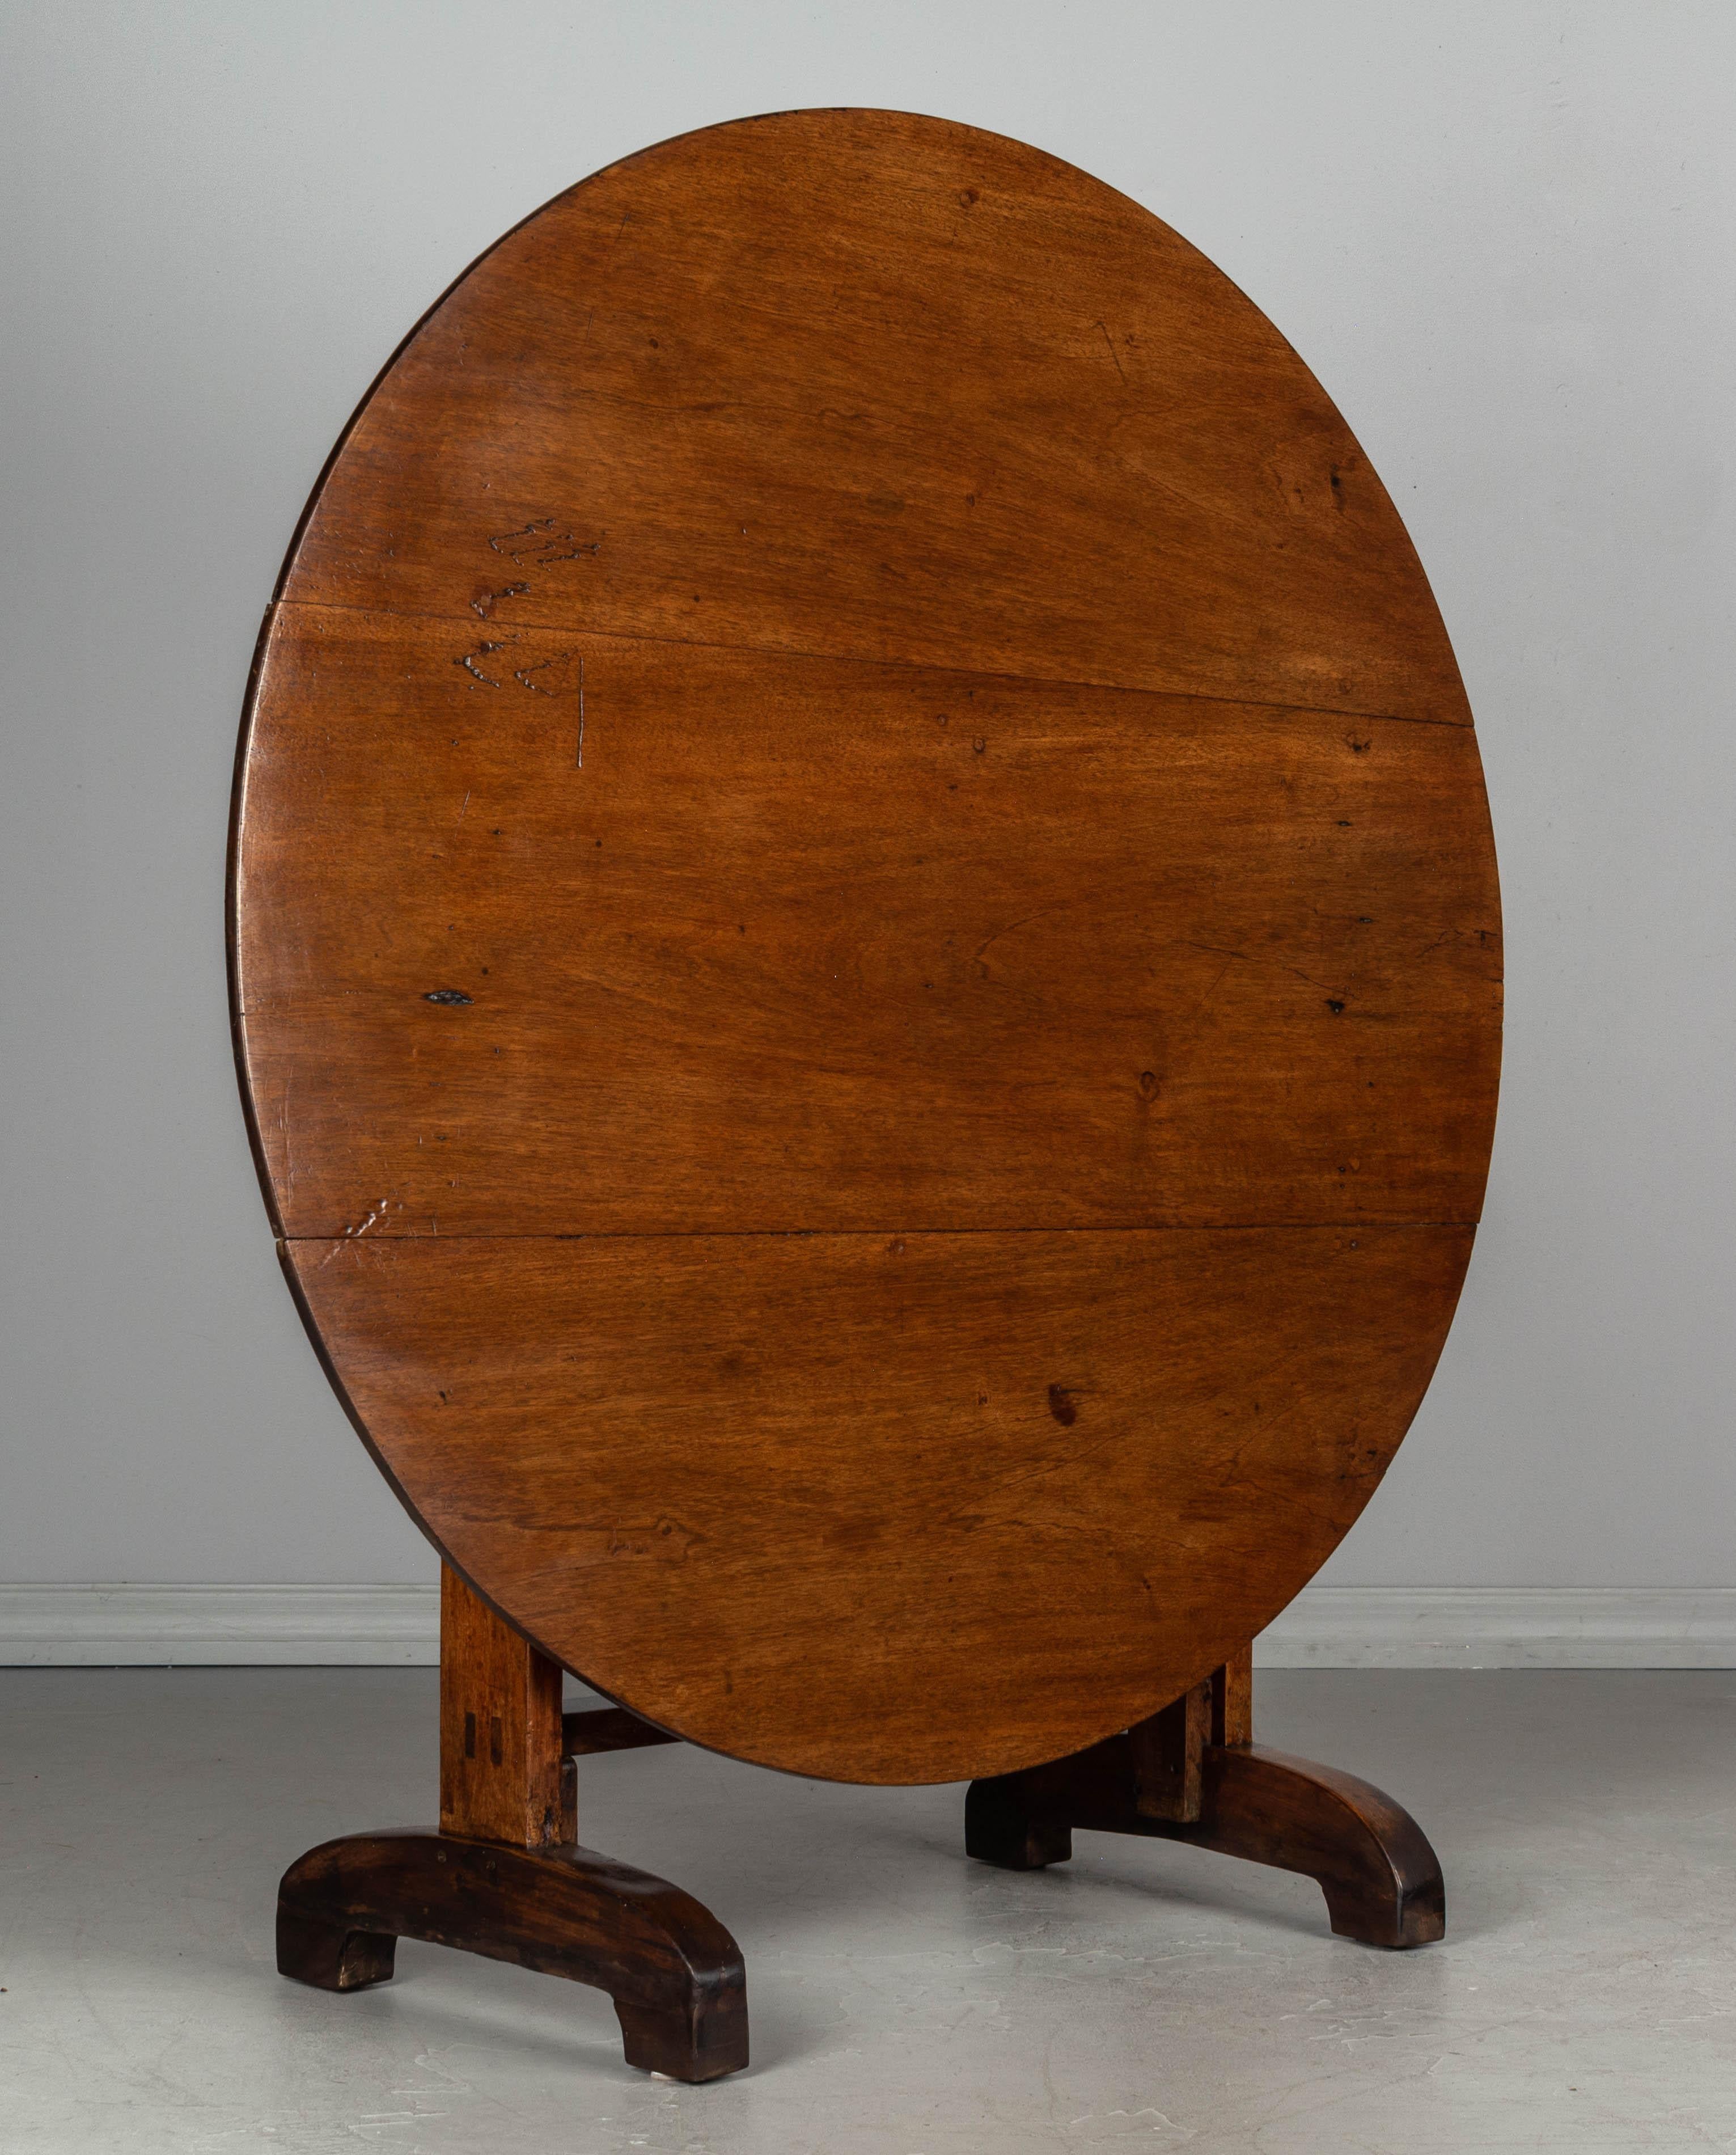 A 19th century French wine tasting, or tilt-top table, made of solid walnut. The top is made from three planks of walnut and the base is thick and sturdy. Well-crafted with mortise and Tenon joints and pegged construction. The feet have been